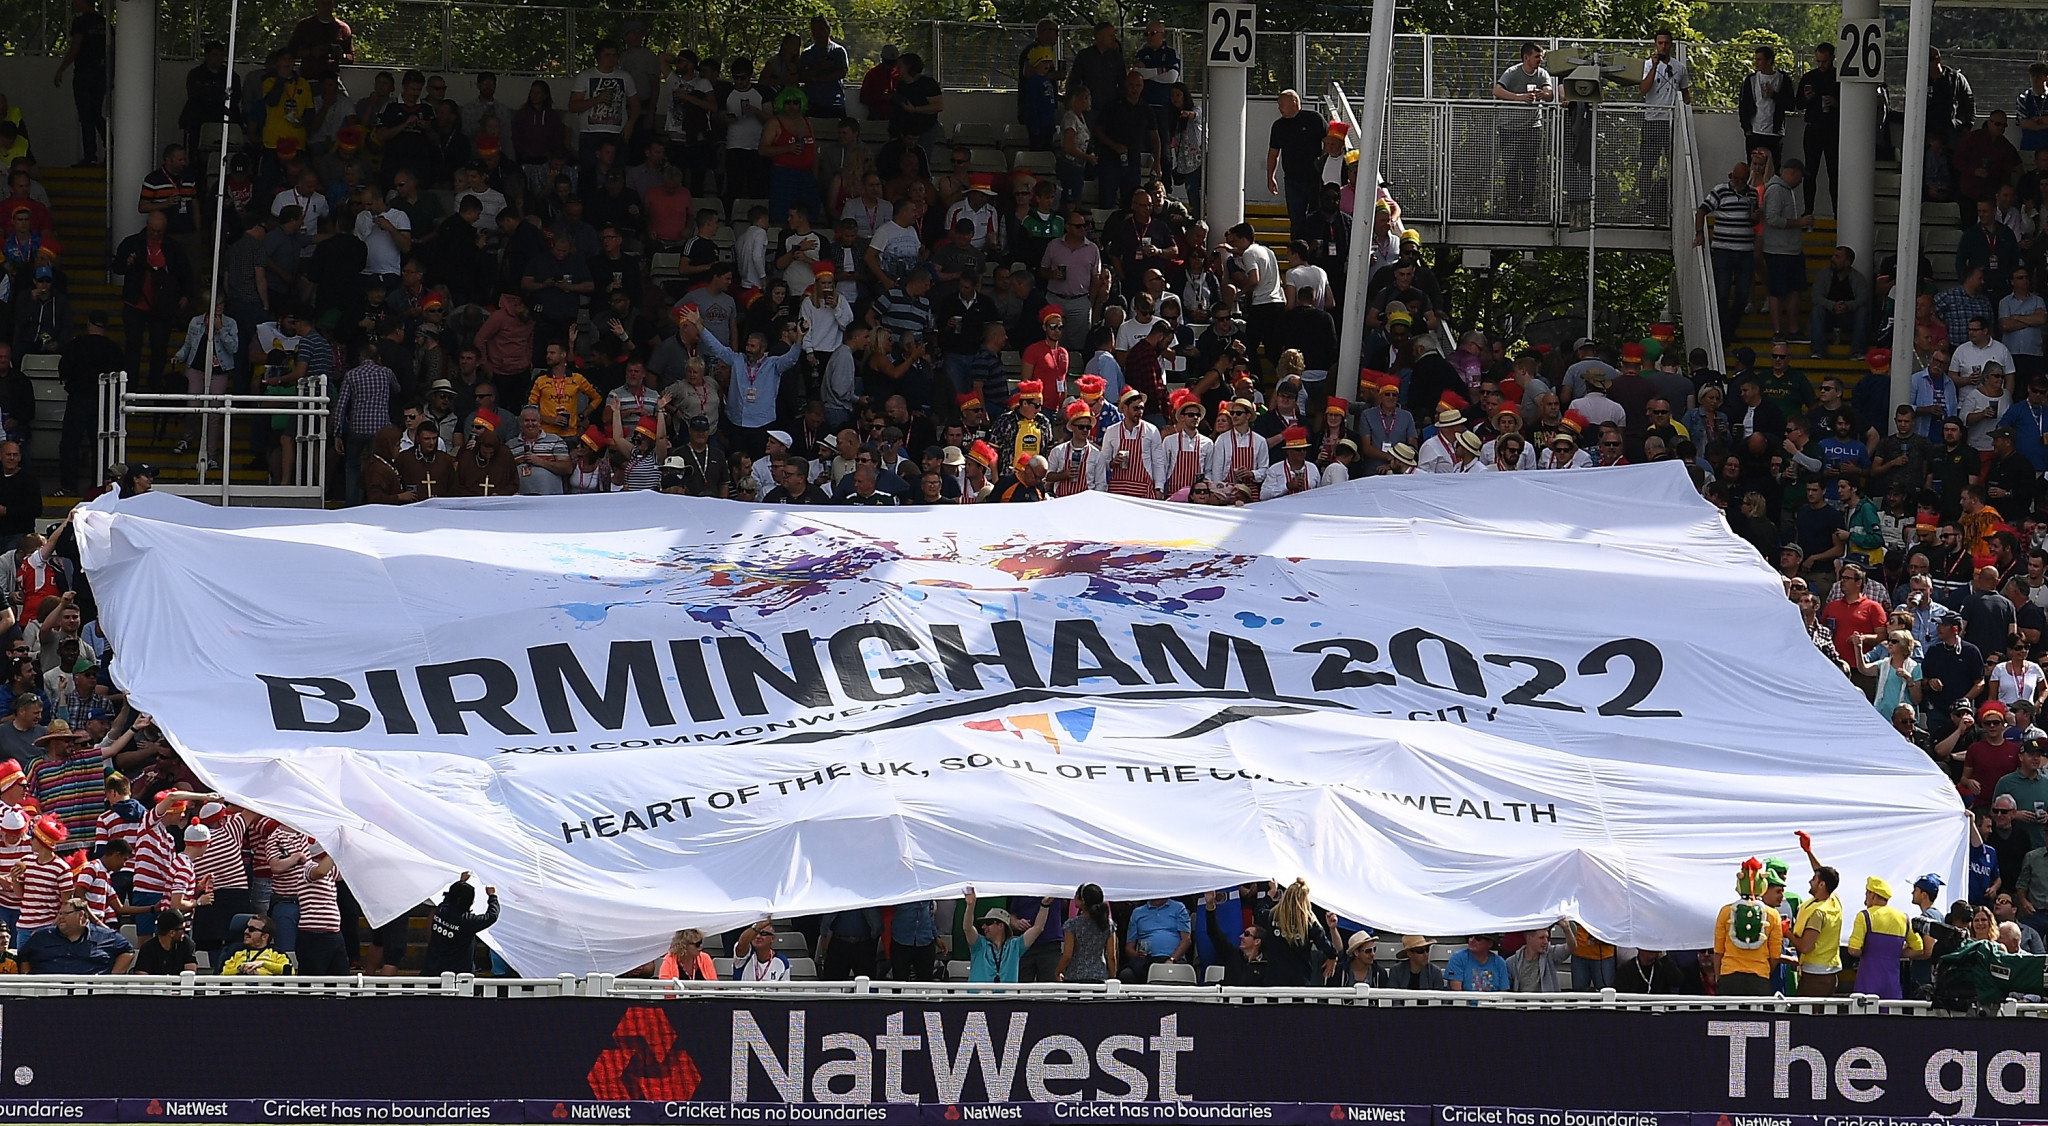 Birmingham City Council claim services will be unaffected by potential hosting of 2022 Commonwealth Games